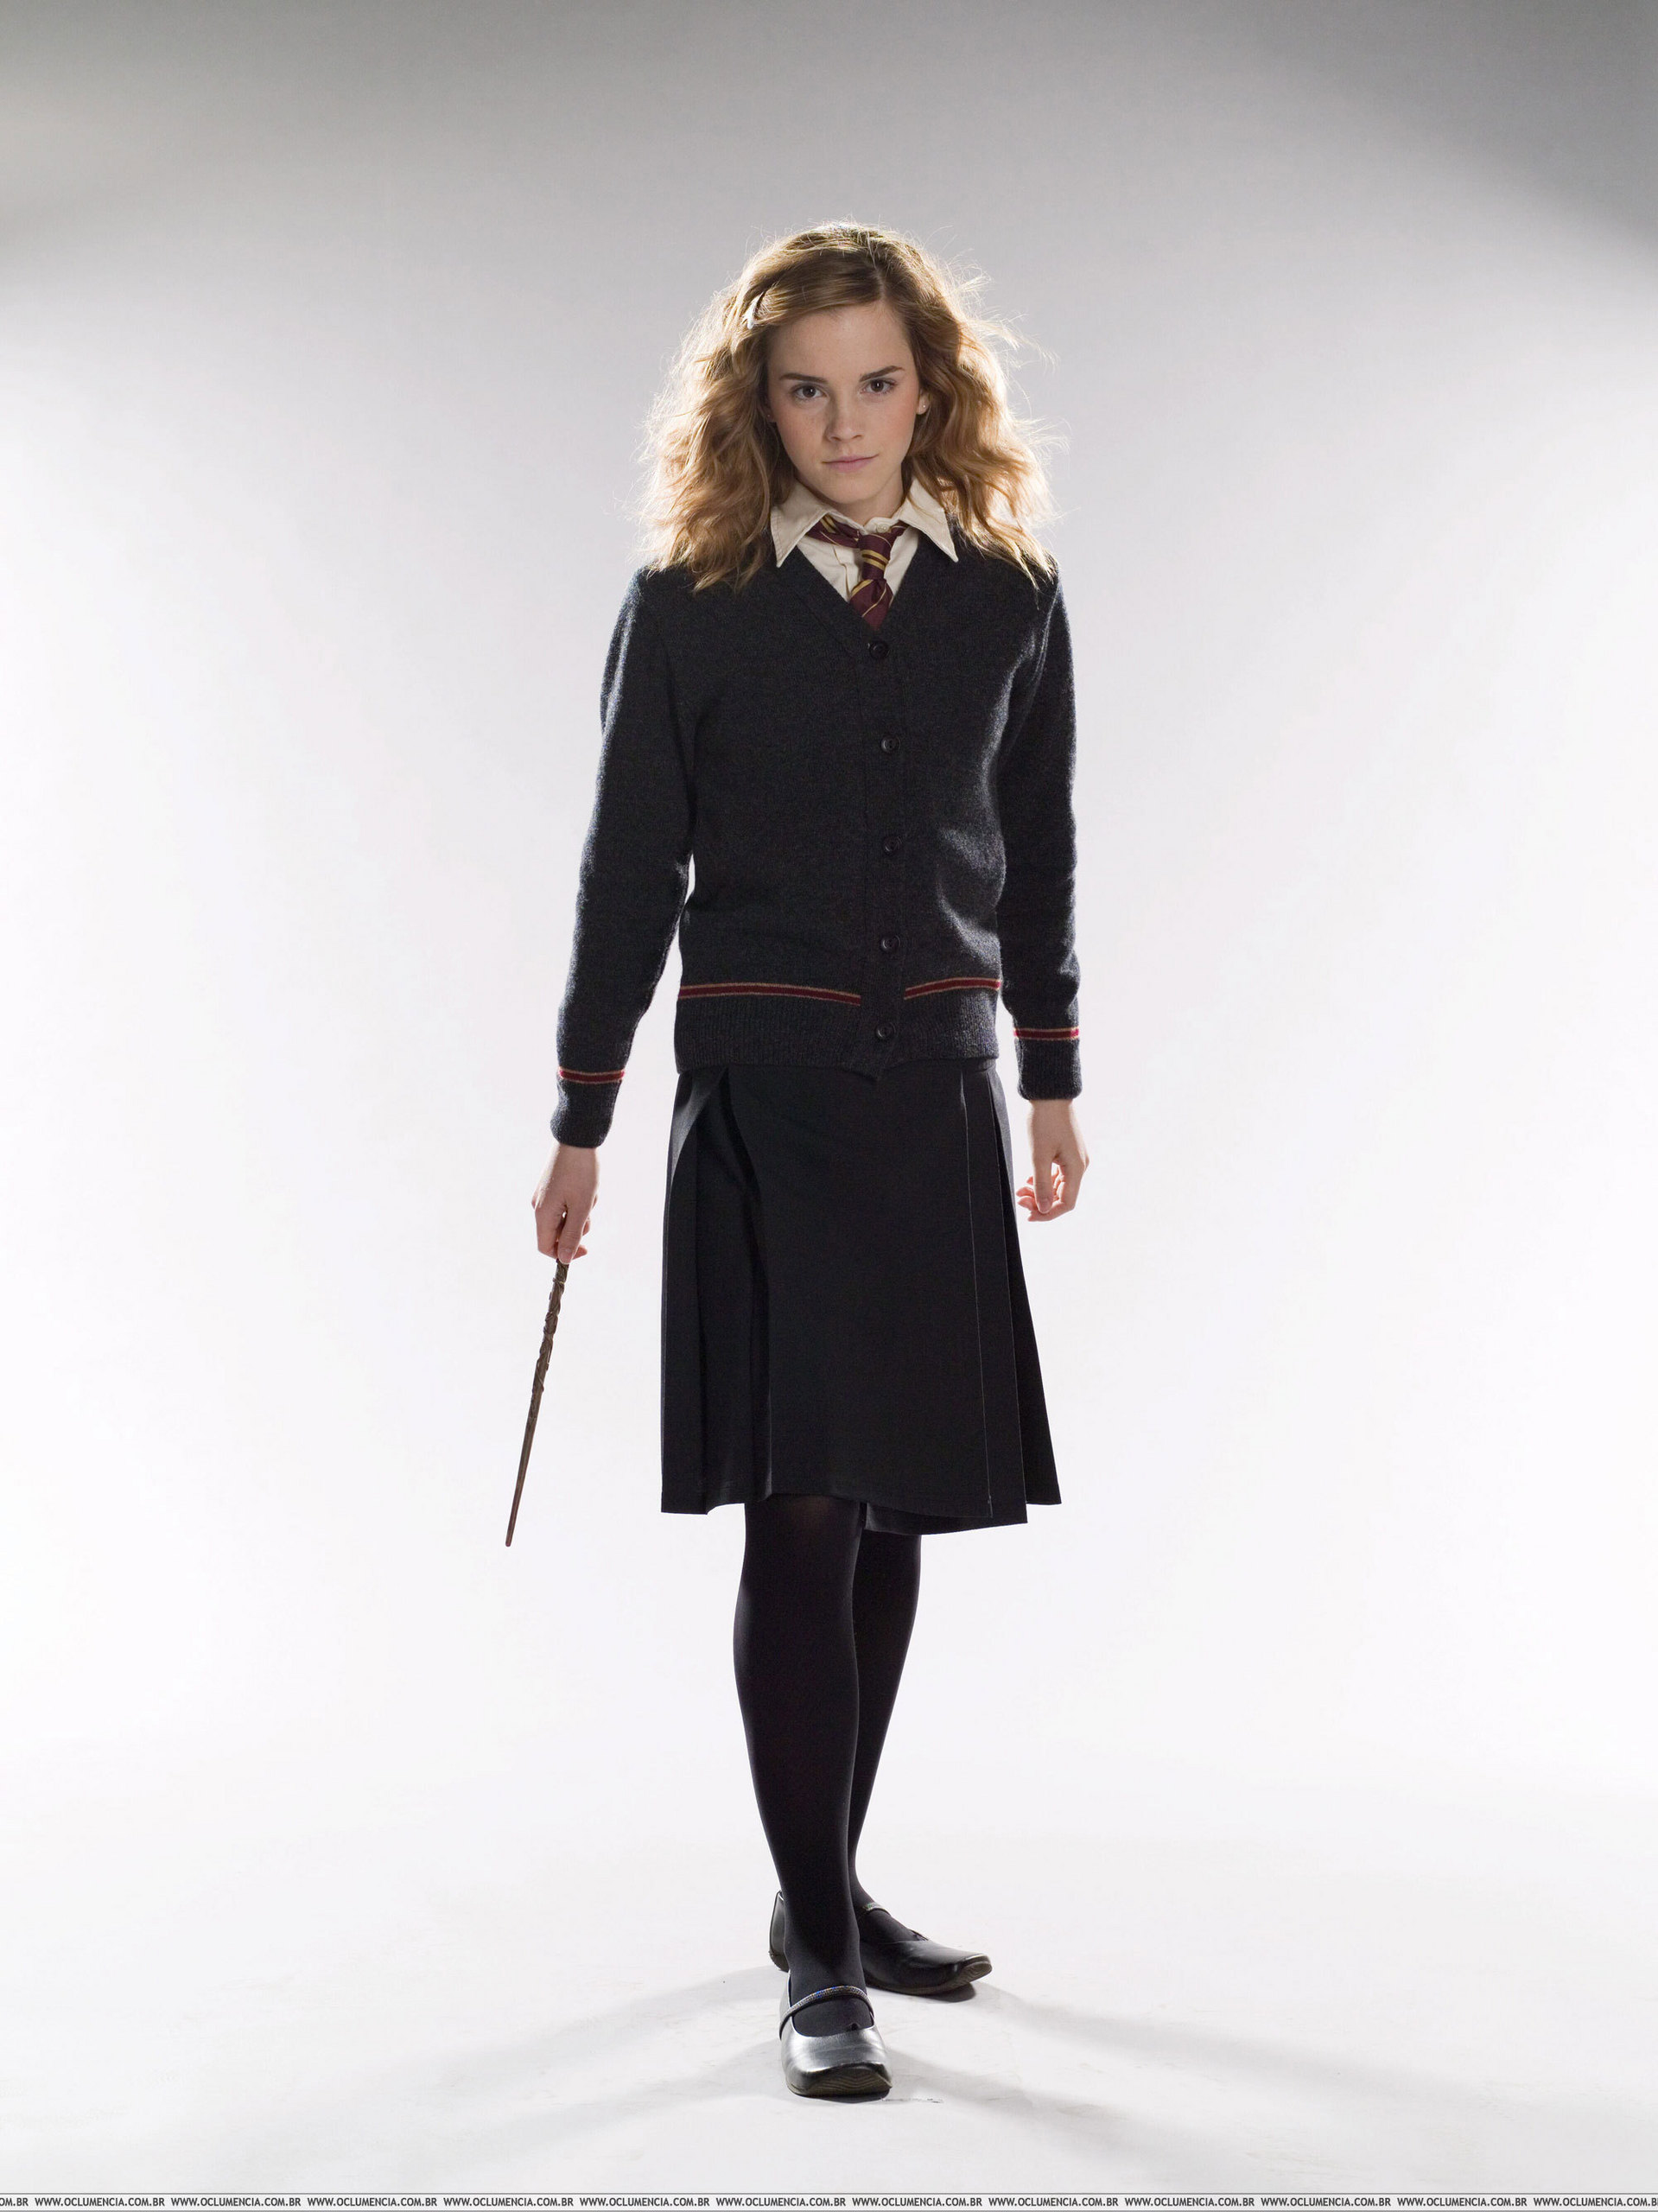 https://static.wikia.nocookie.net/book-of-heroes-and-villains/images/3/30/HermioneGranggger.jpg/revision/latest?cb=20220419230304